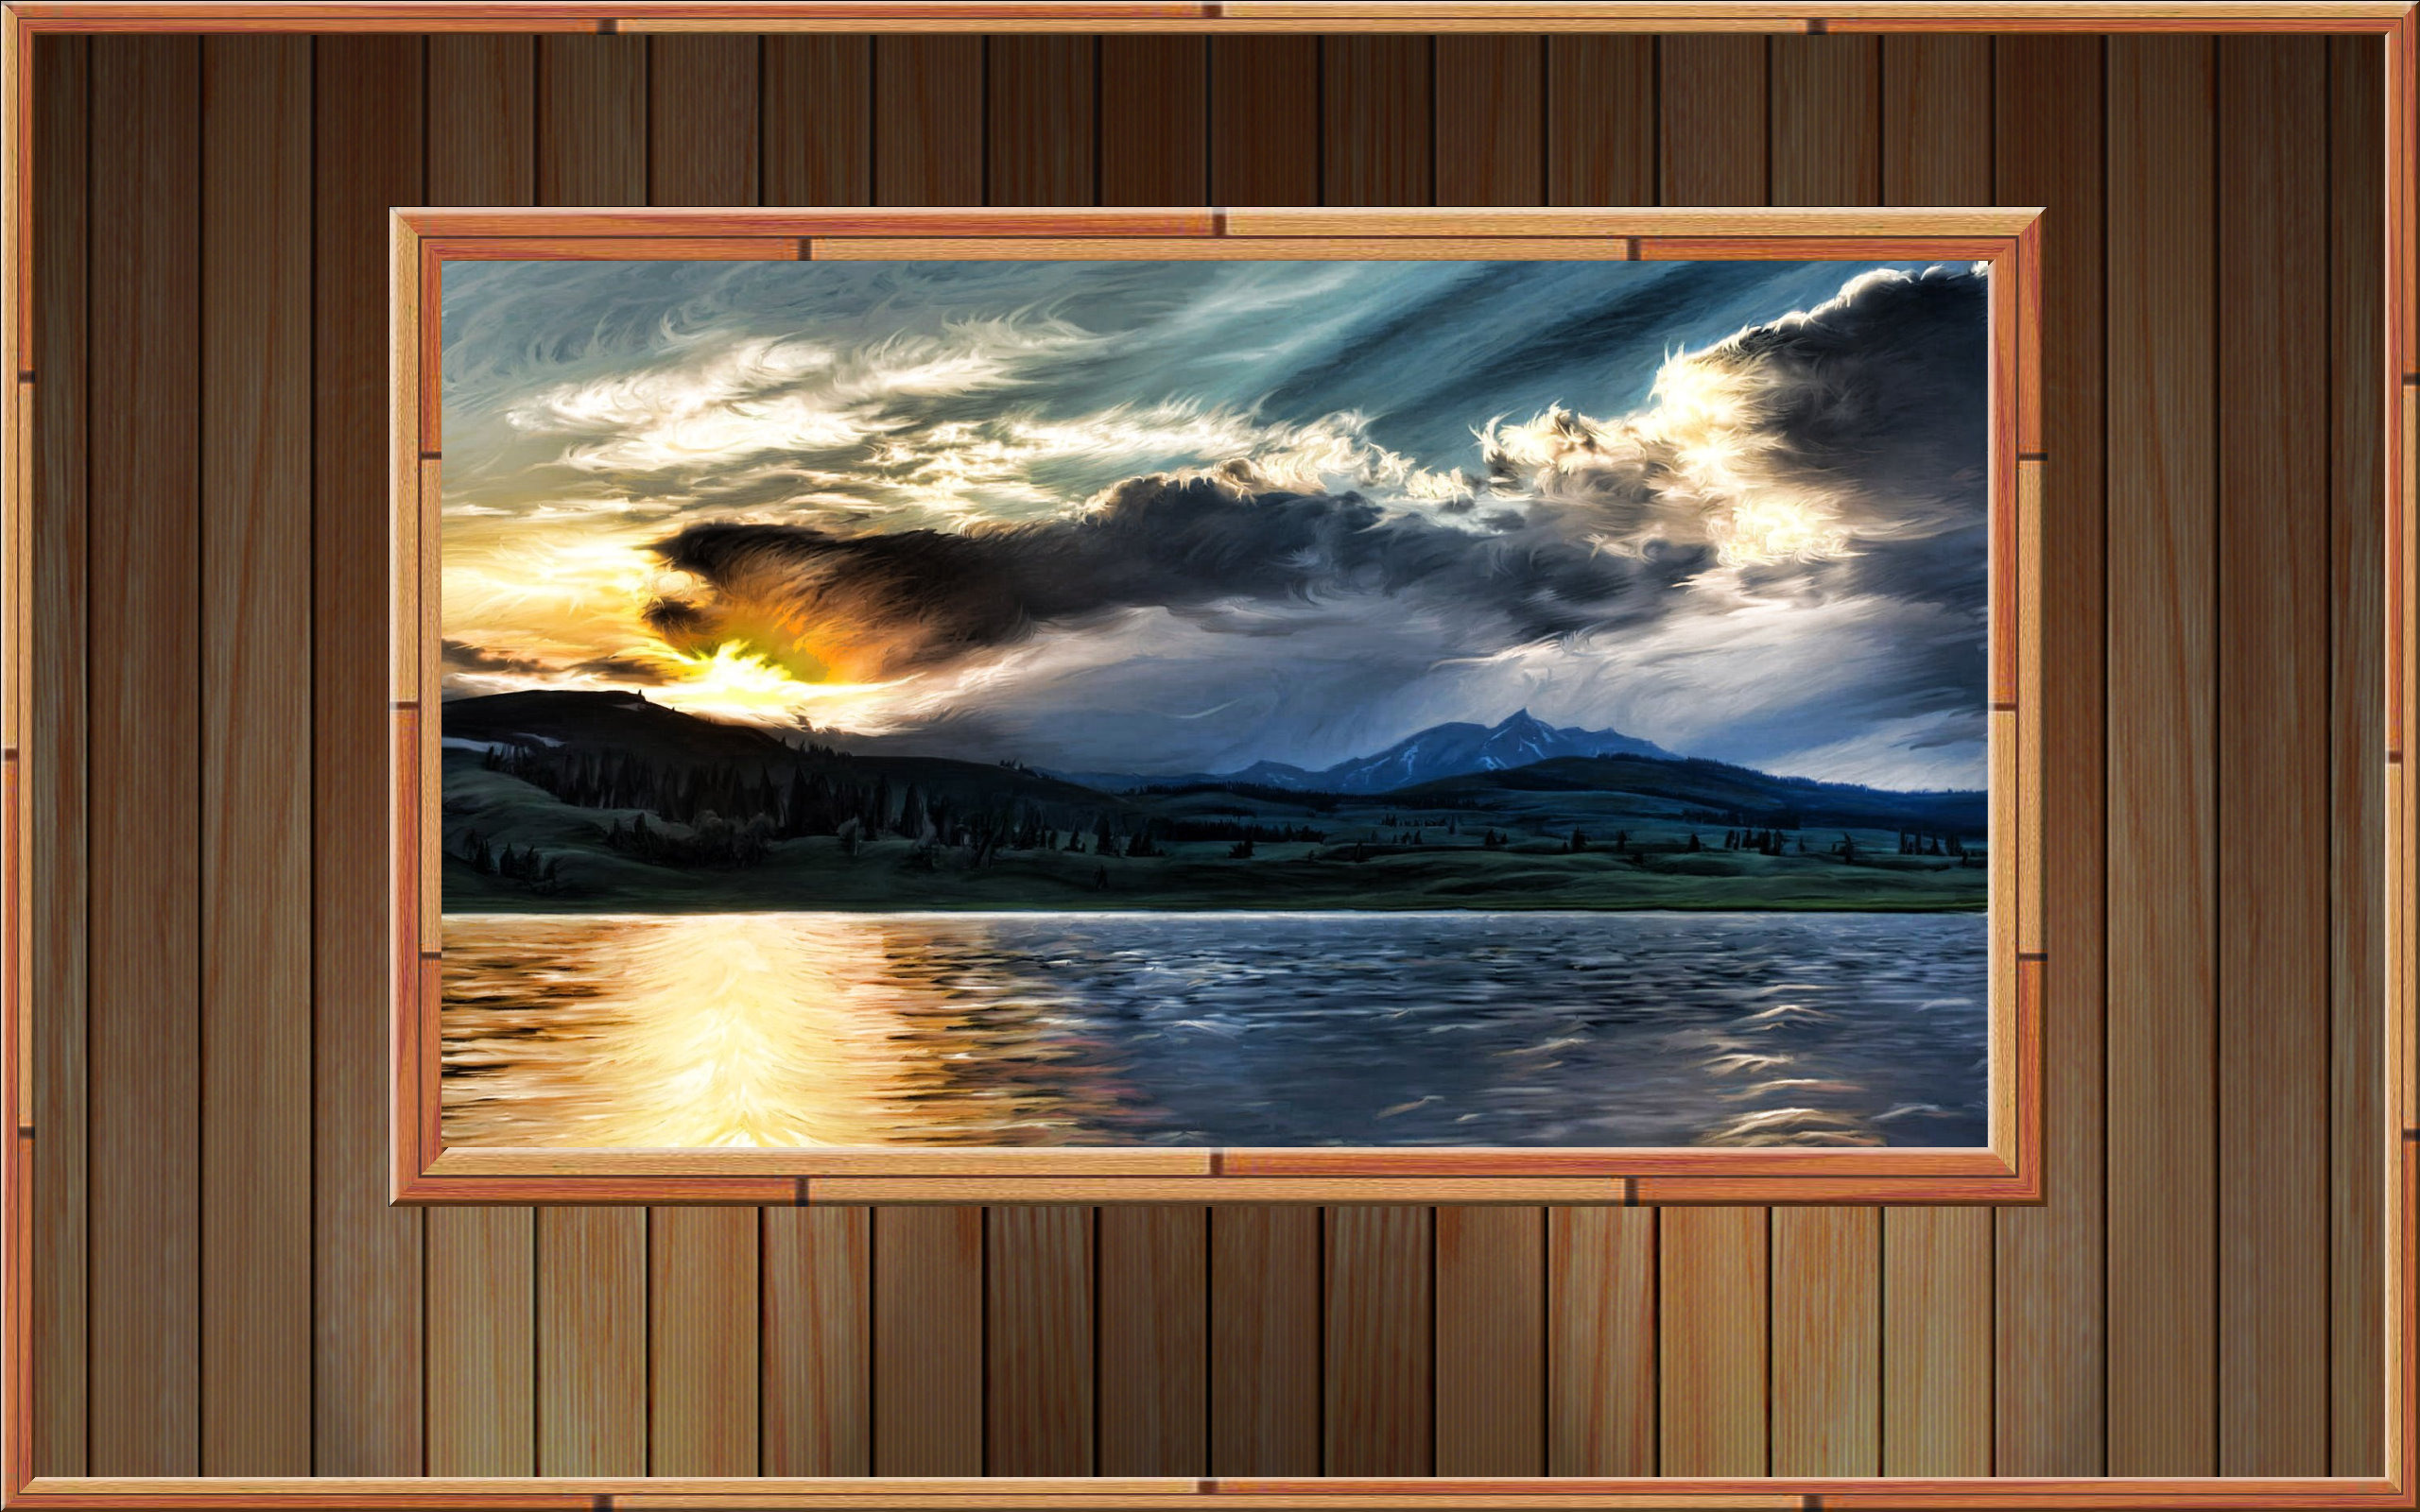 General 2560x1600 wall planks wooden surface painting sea mountains sunset landscape